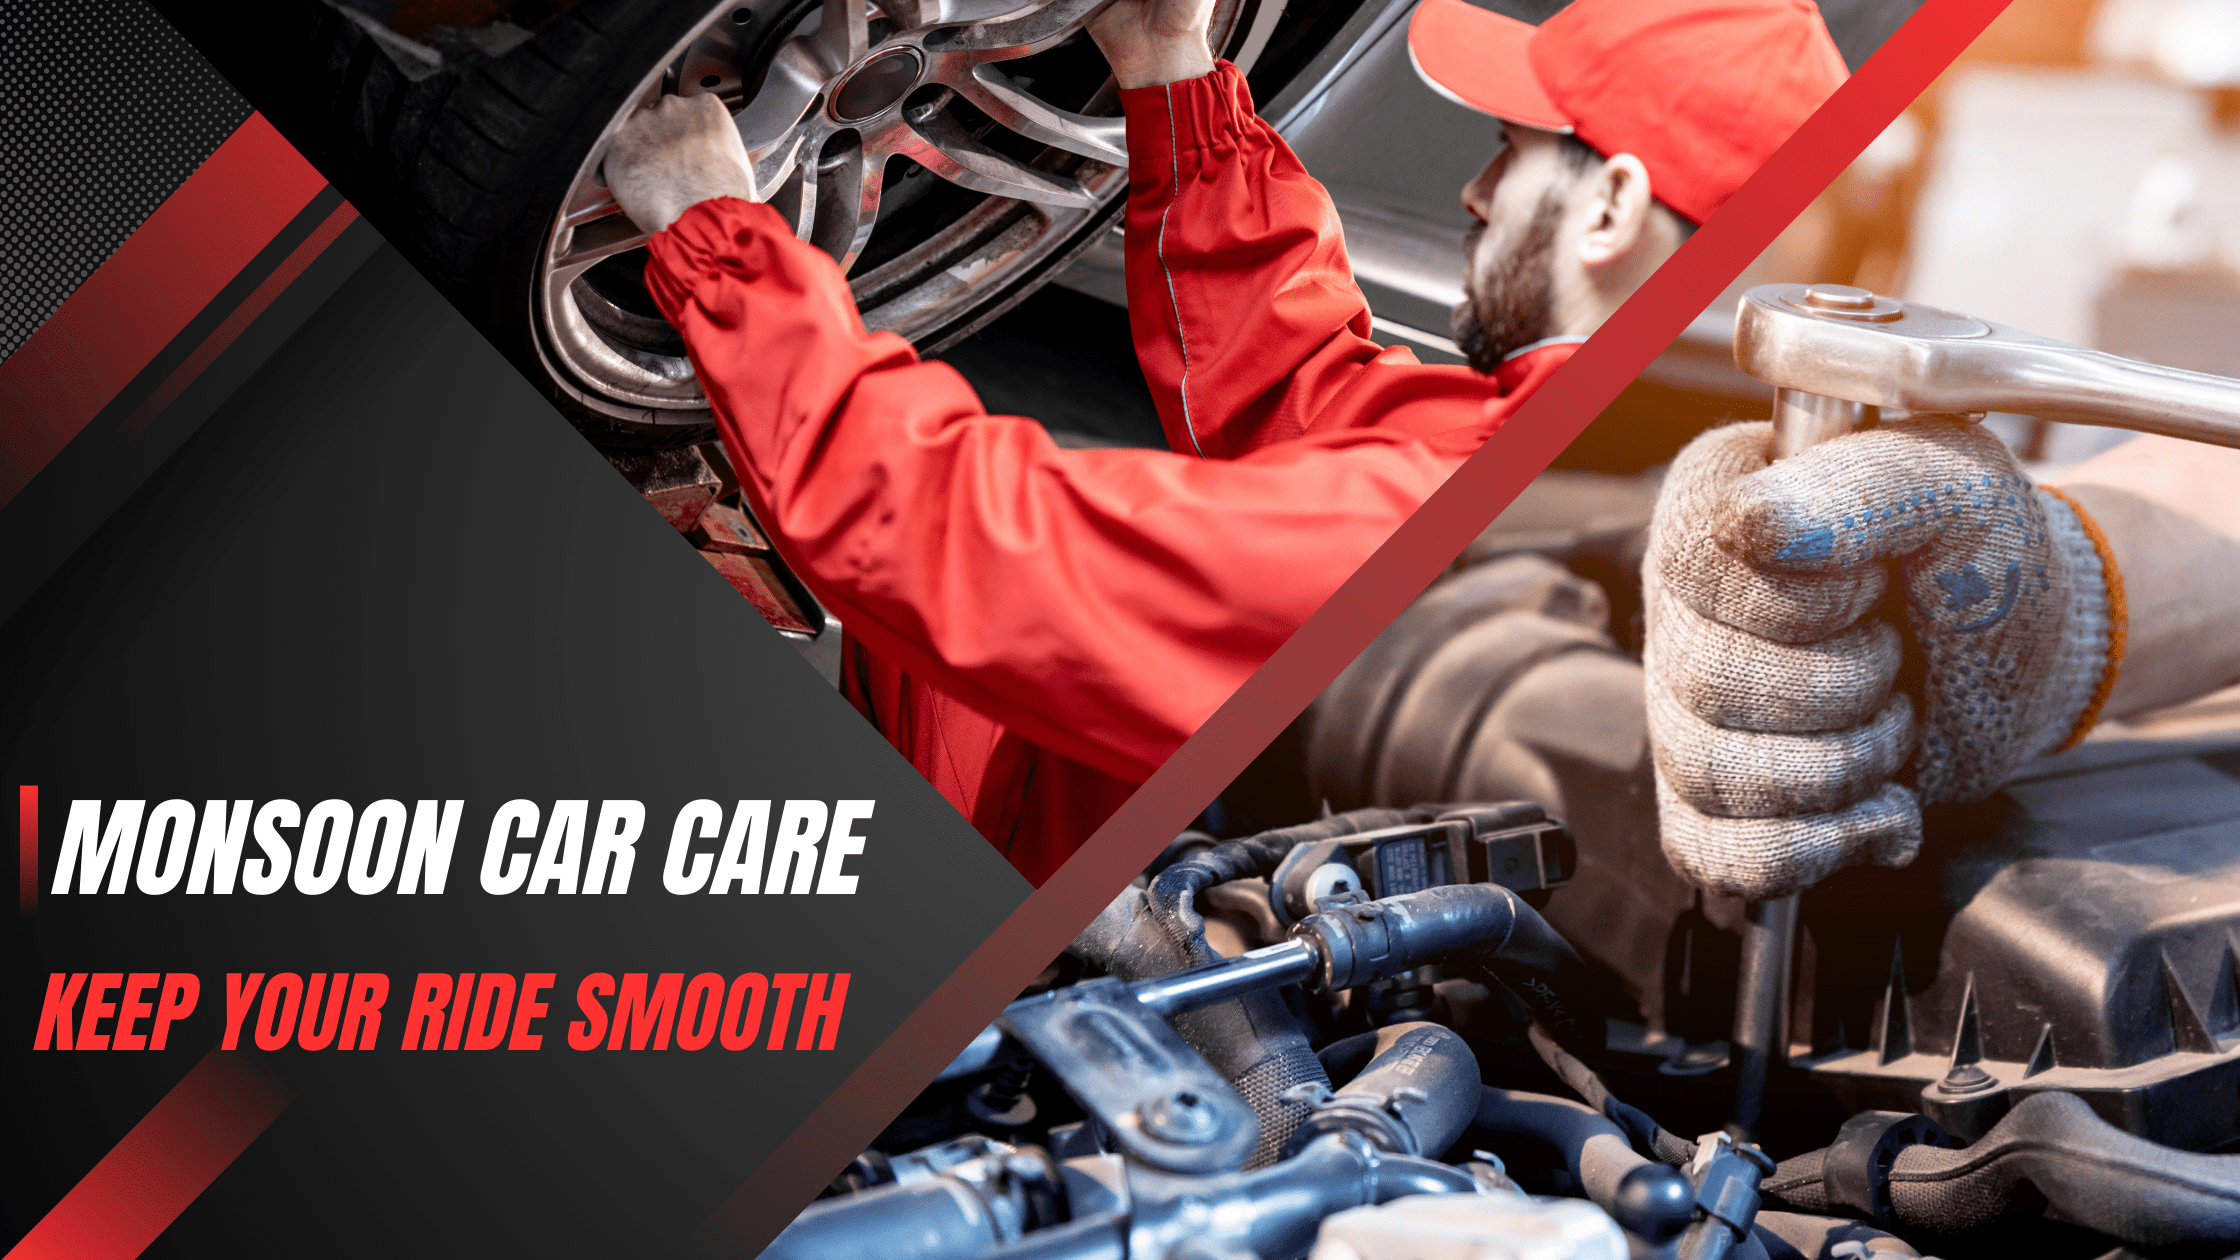 Important Tips for Monsoon Car Maintenance: keep the vehicle running smoothly